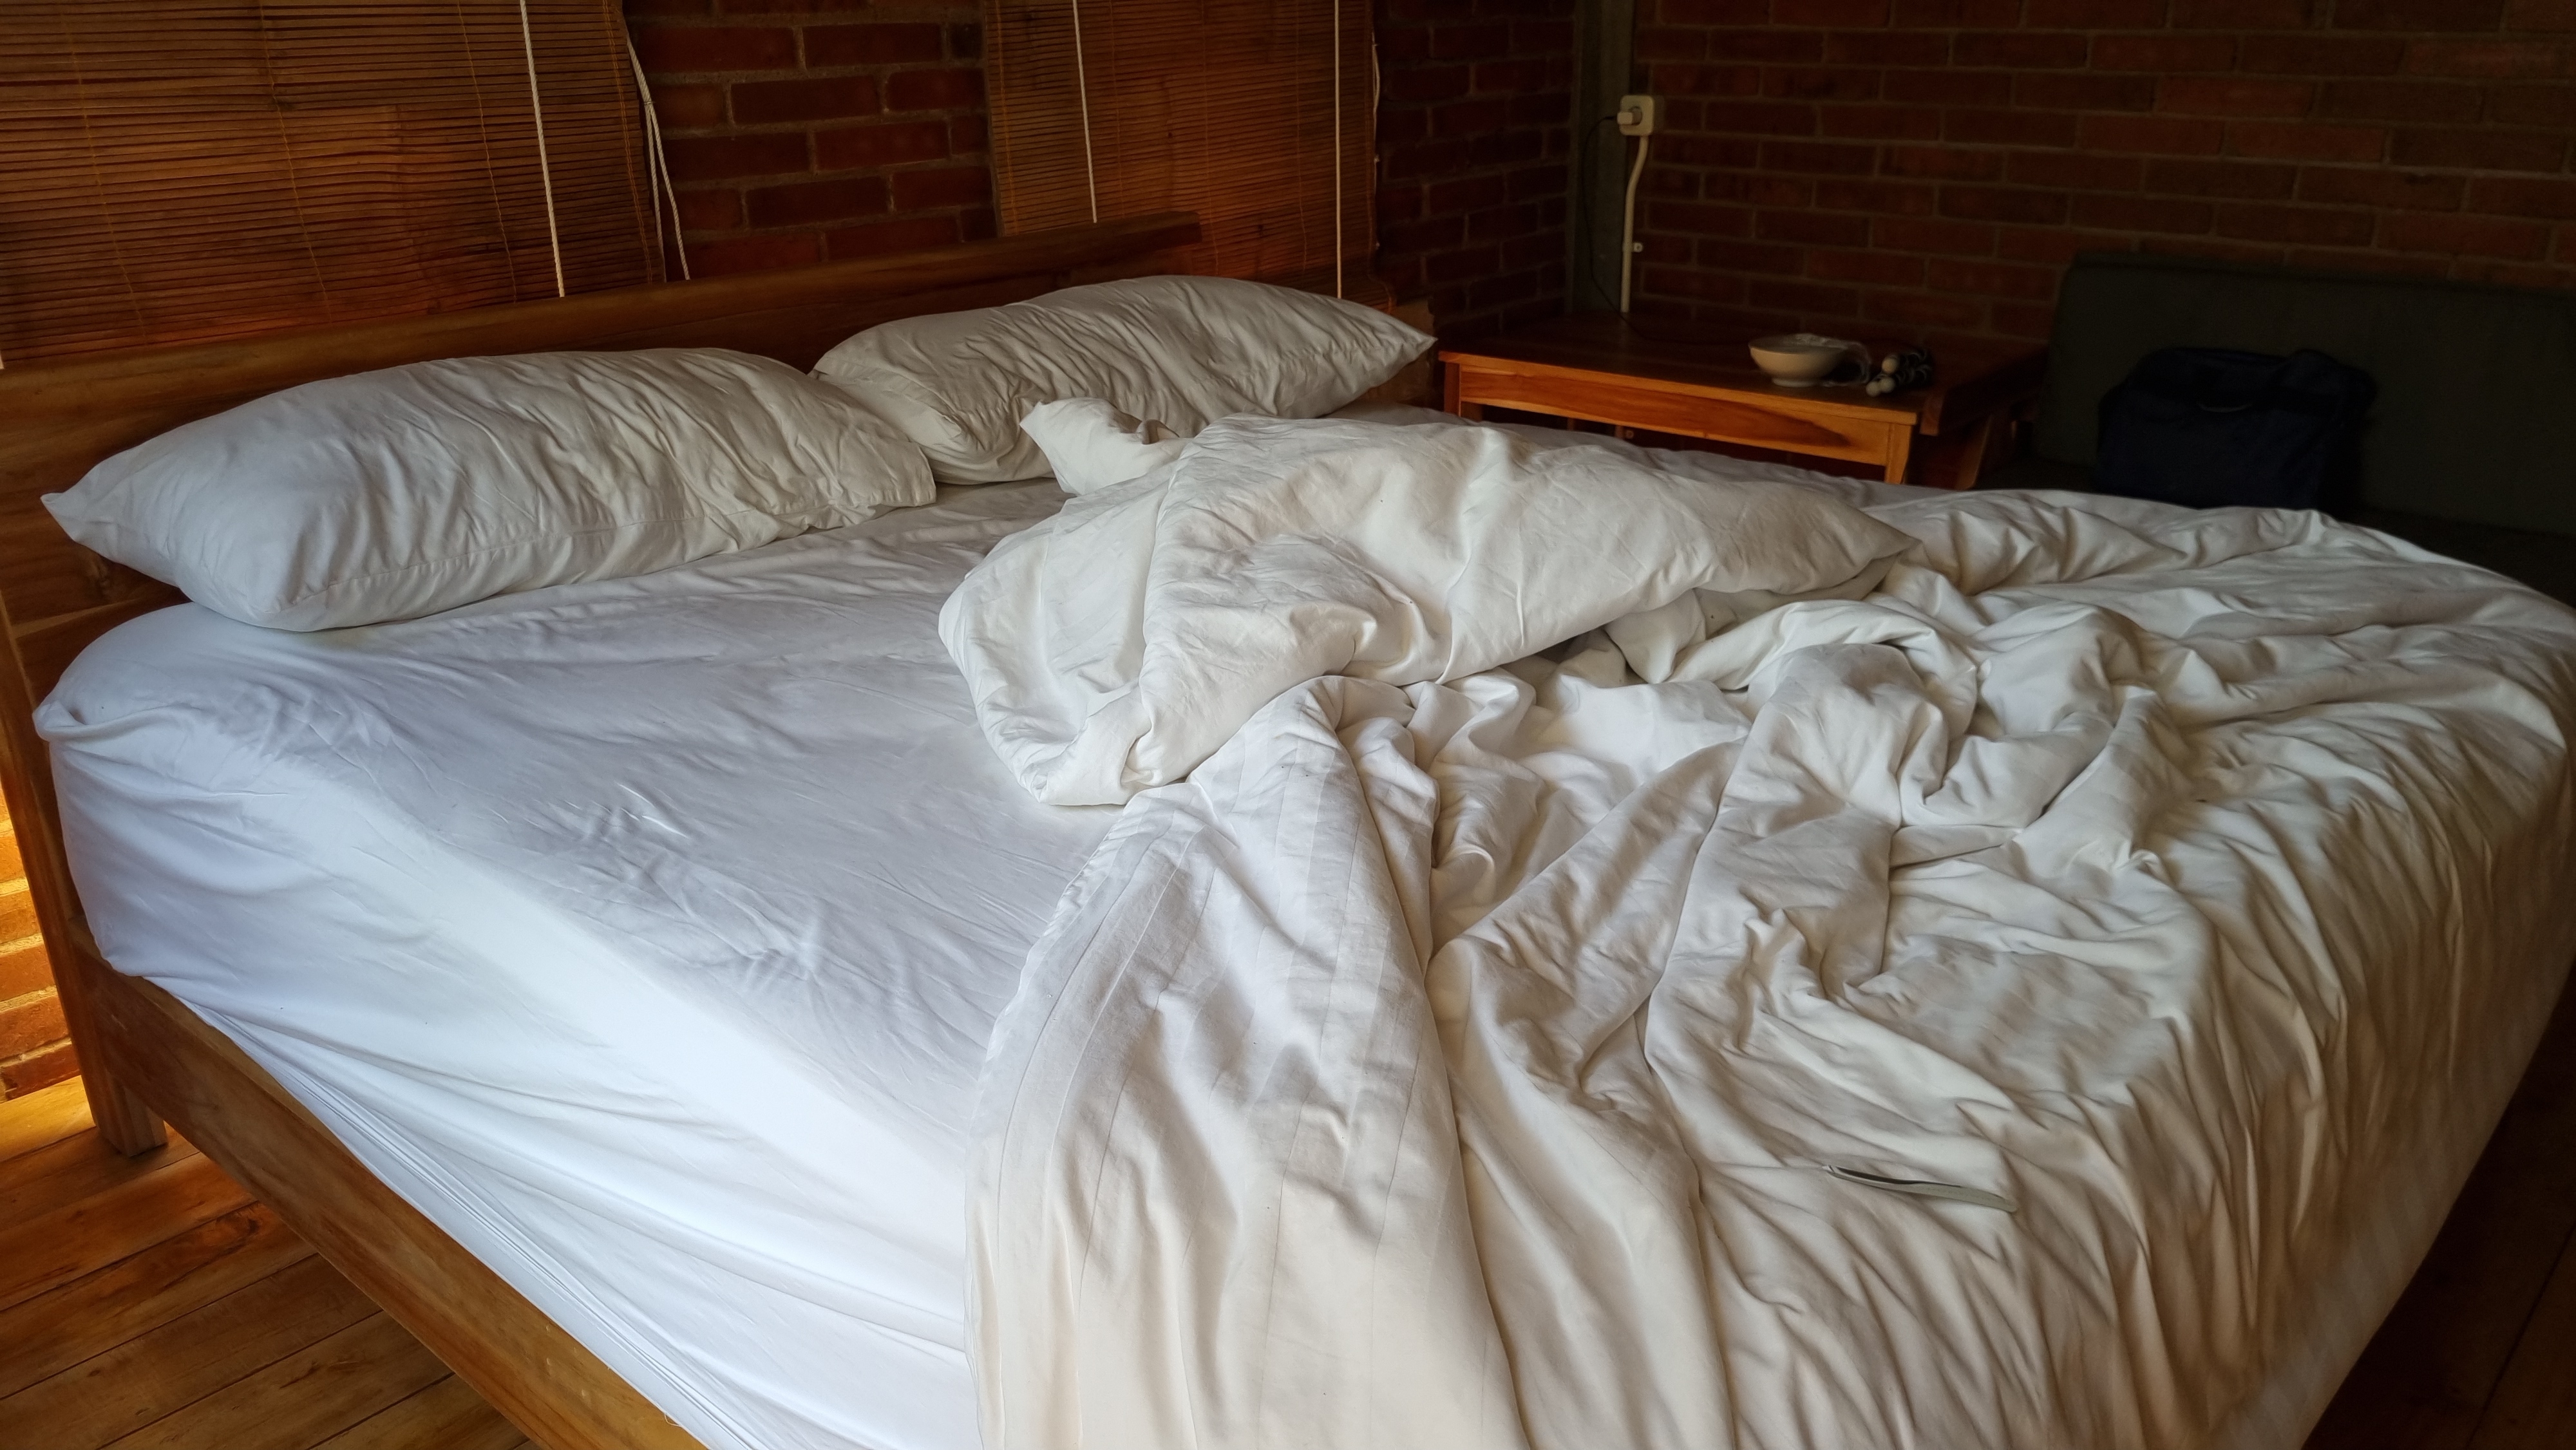 A messy, unmade bed | Source: Shutterstock